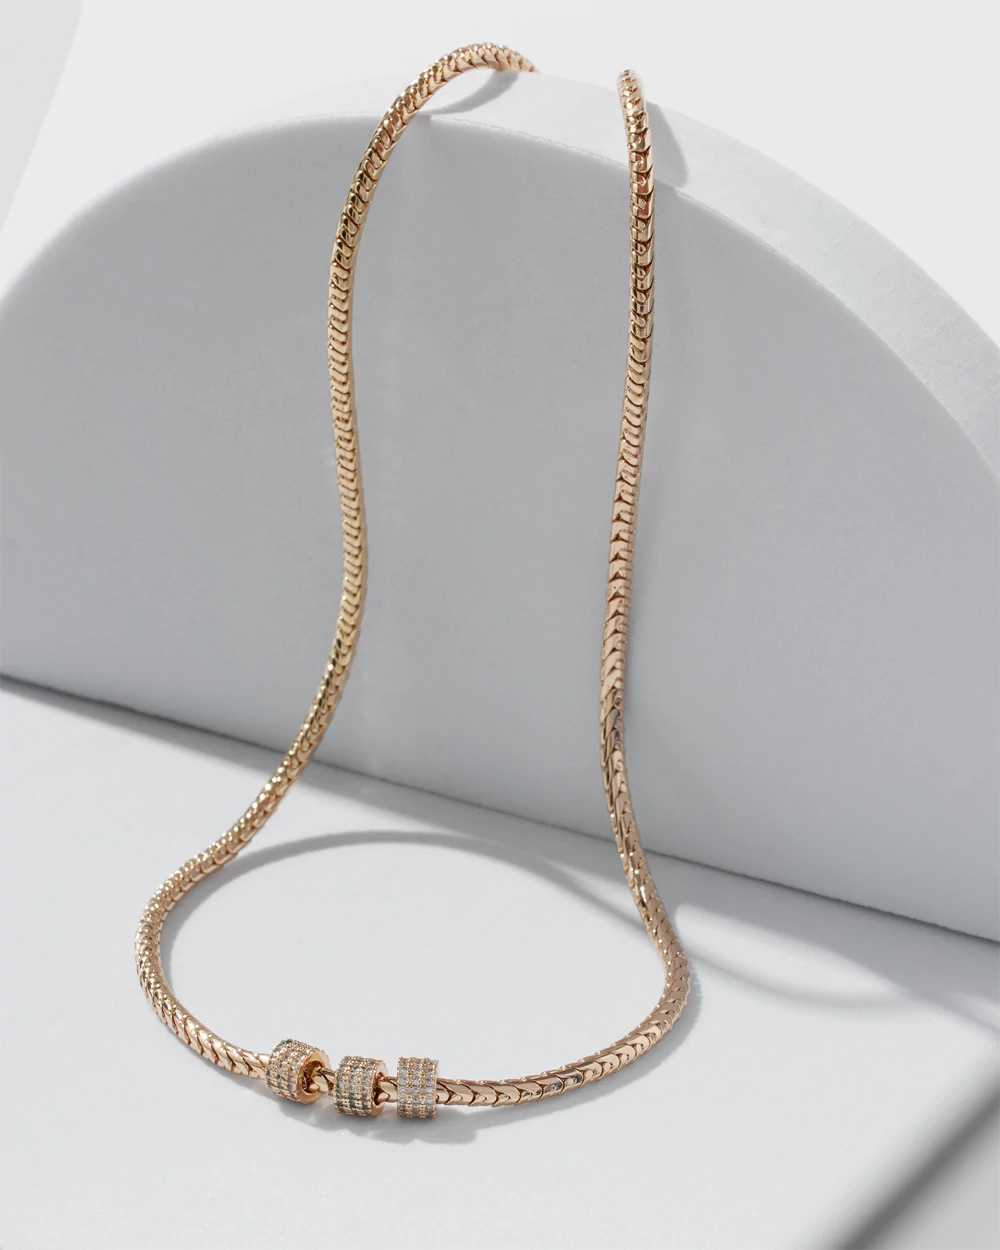 Gold Chain Pave Ring Necklace click to view larger image.